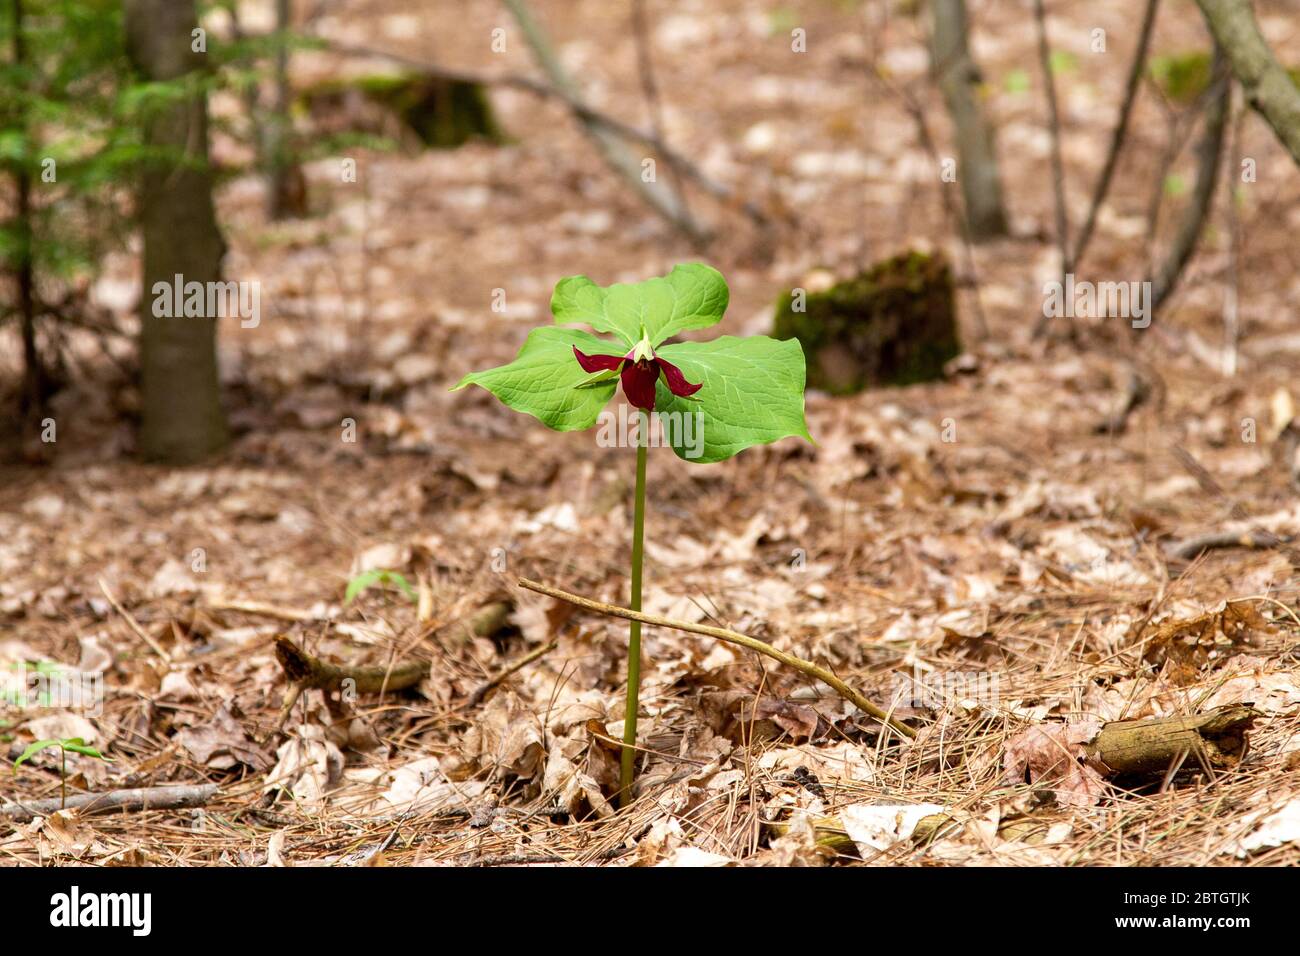 A single red trillium flower emerges from the ground in a forest. Stock Photo